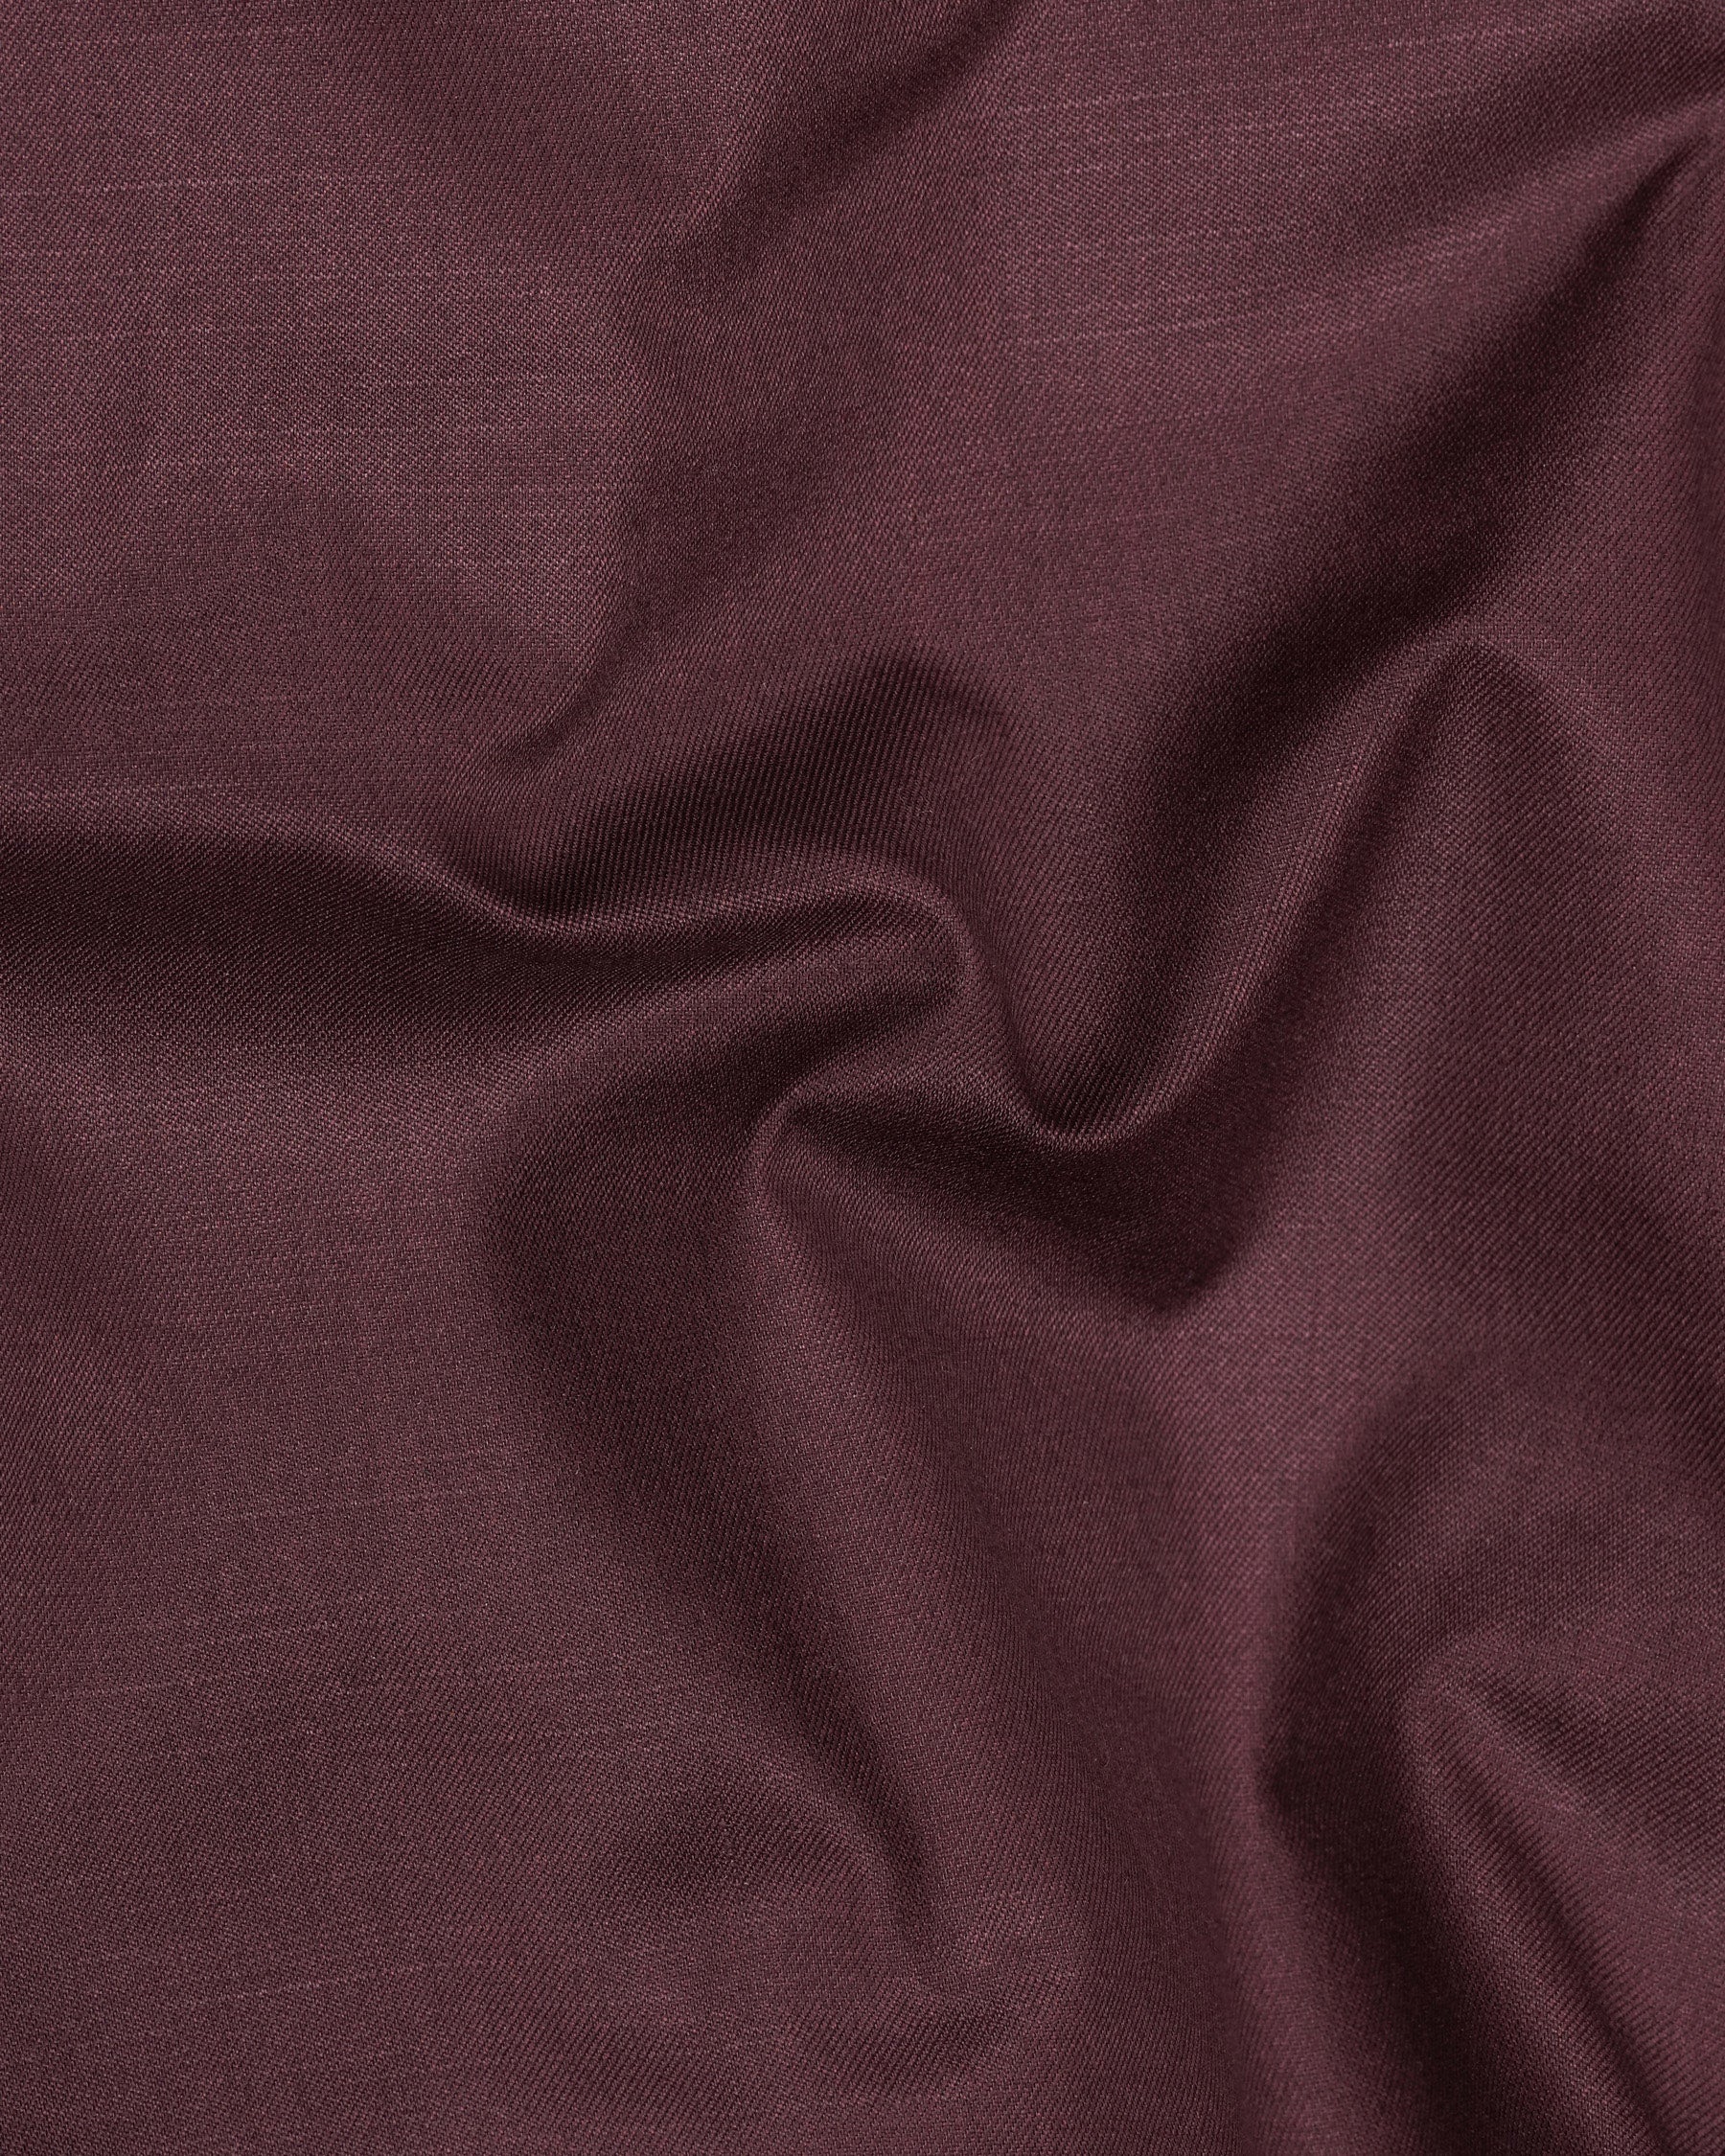 Plain Multicolor Stretch Satin Fabric at Rs 50/meter in Surat